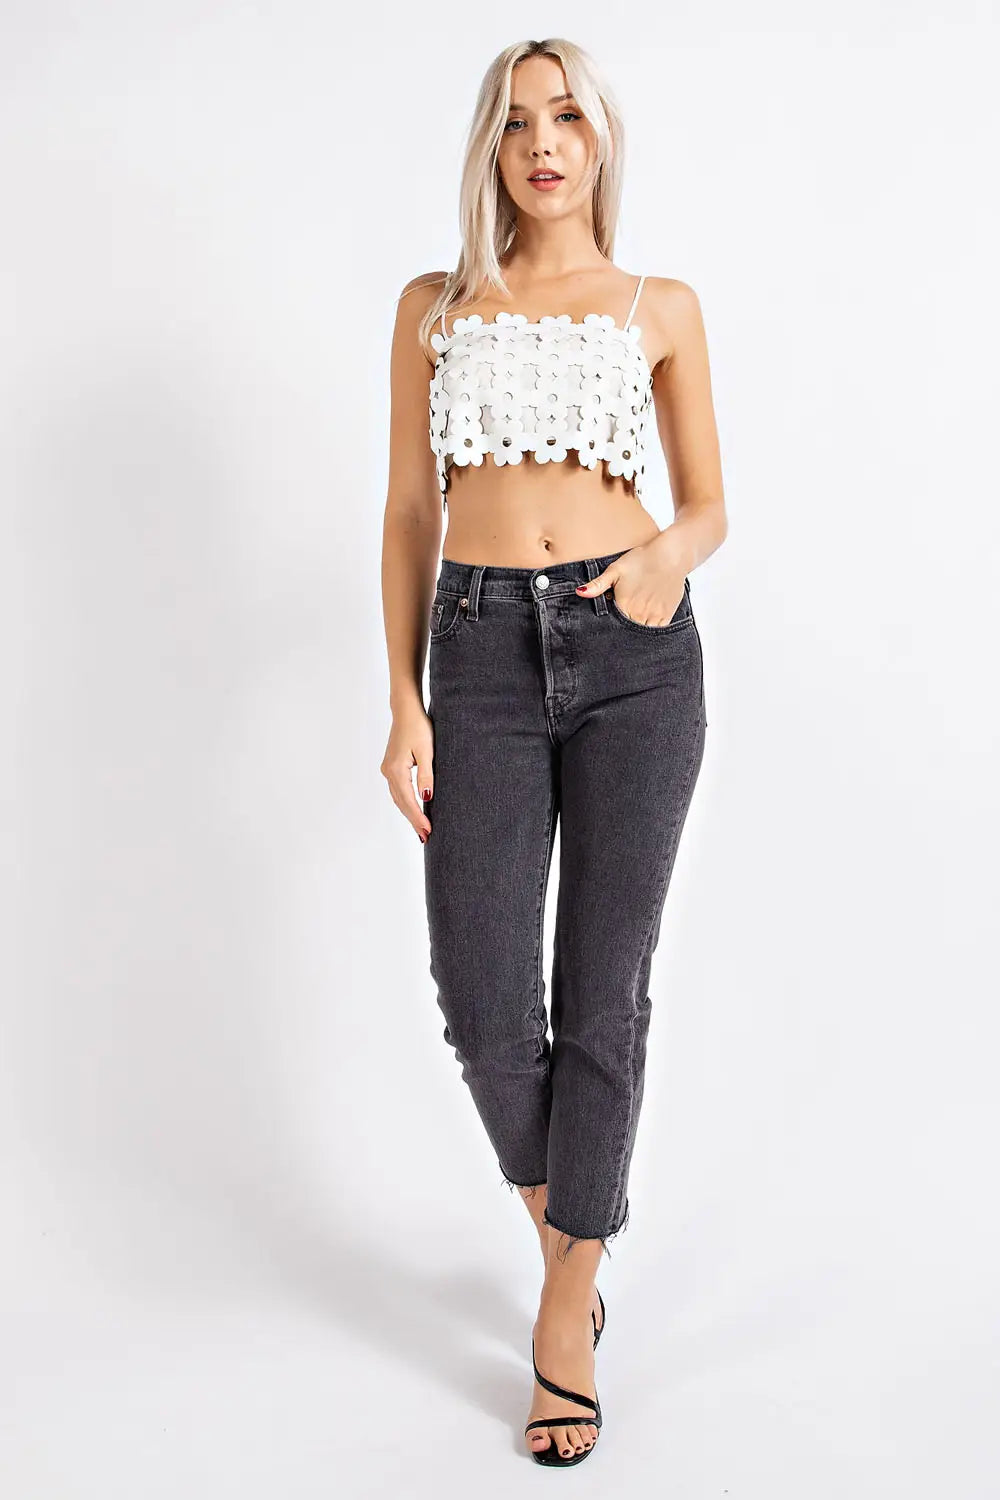 Daisy Chain Leather Crop Top